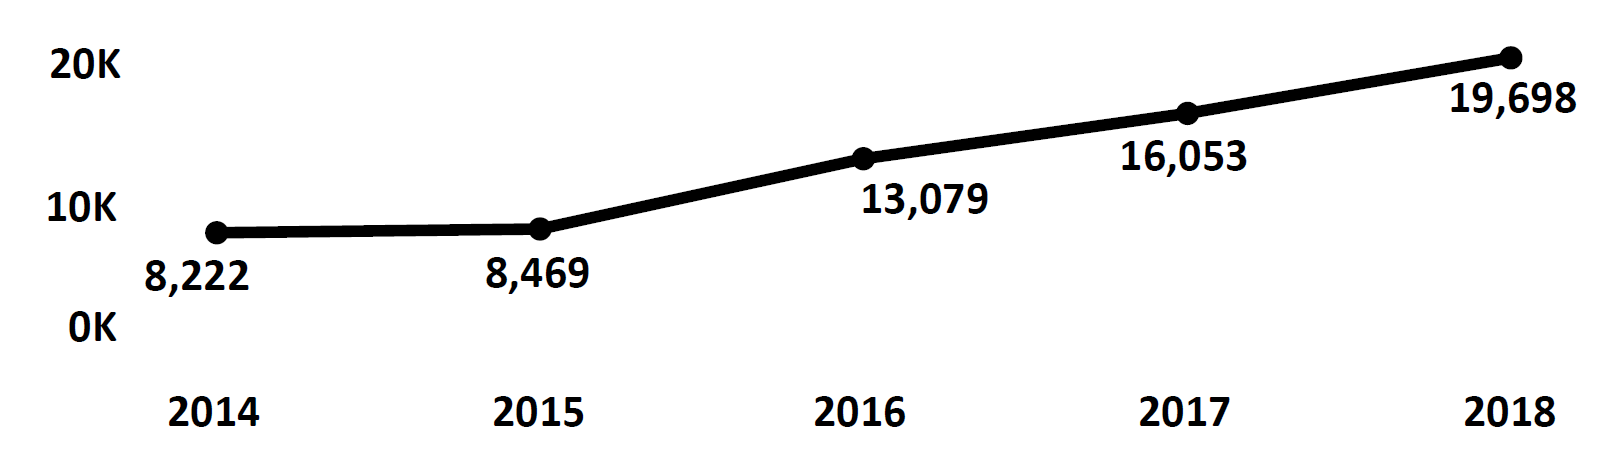 Graph of Do Not Call complaints recorded in Hawaii from fiscal year 2014 to fiscal year 2018. In 2014 there were 8,222 complaints filed, which increased each year to peak at 19,698 in 2018.